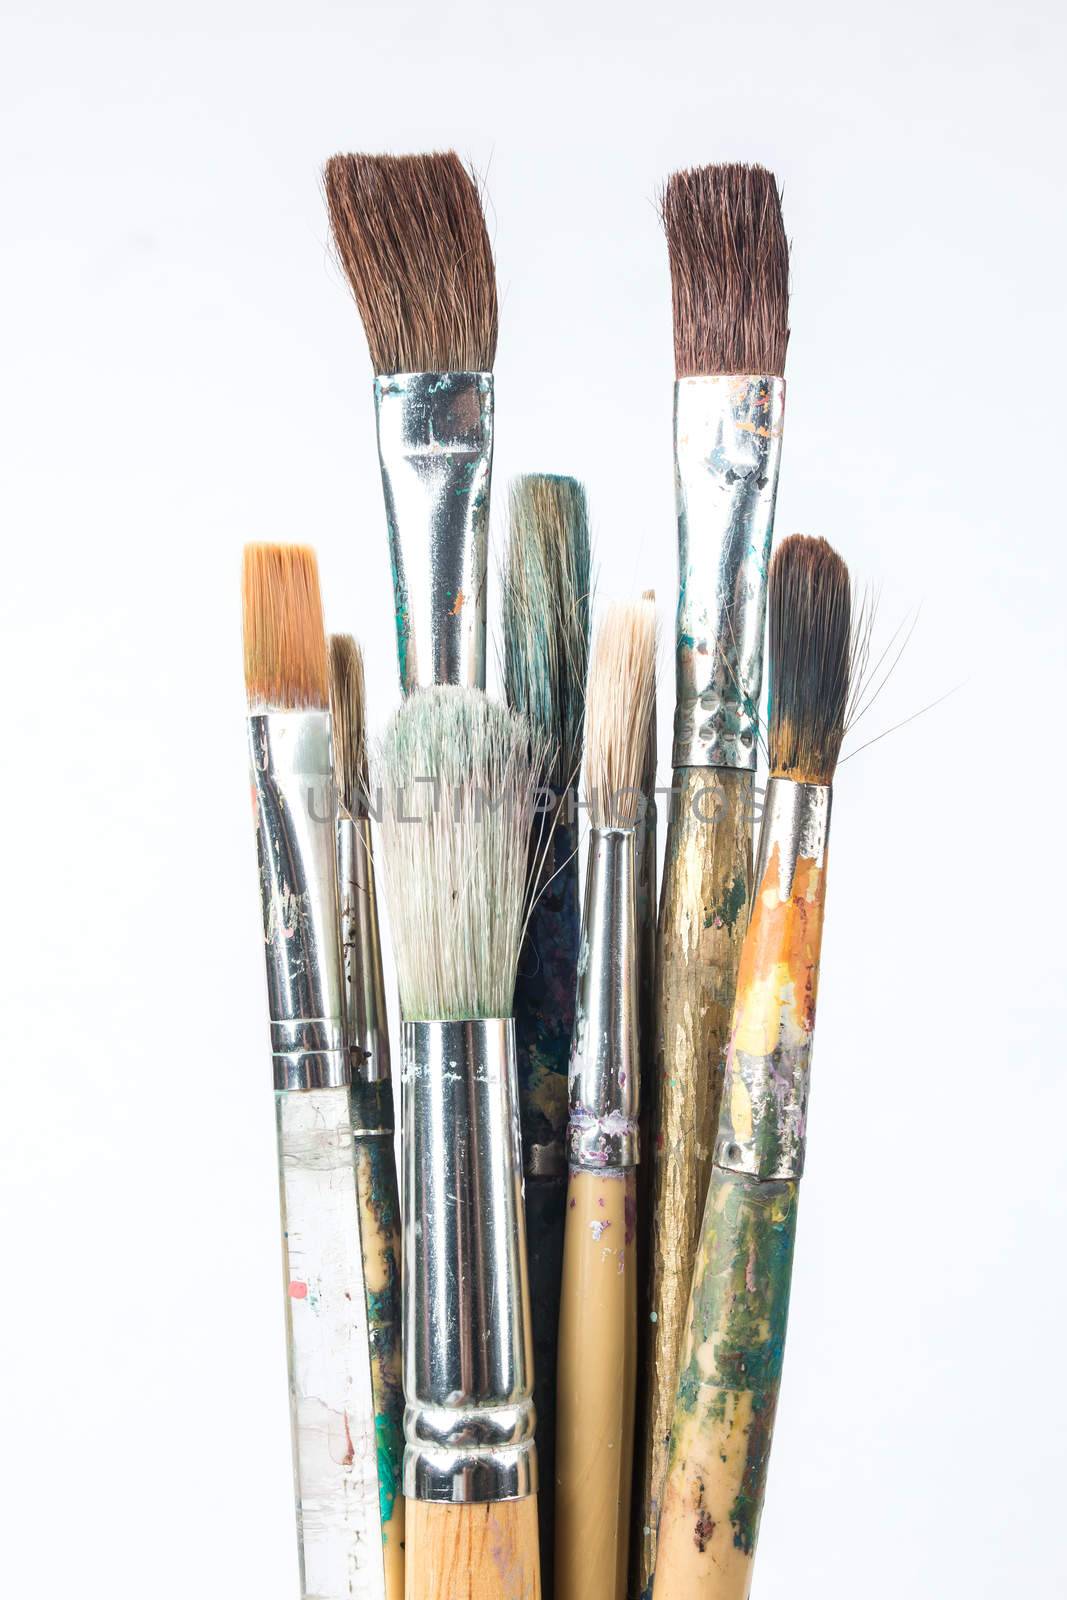 Used brushes by simpleBE